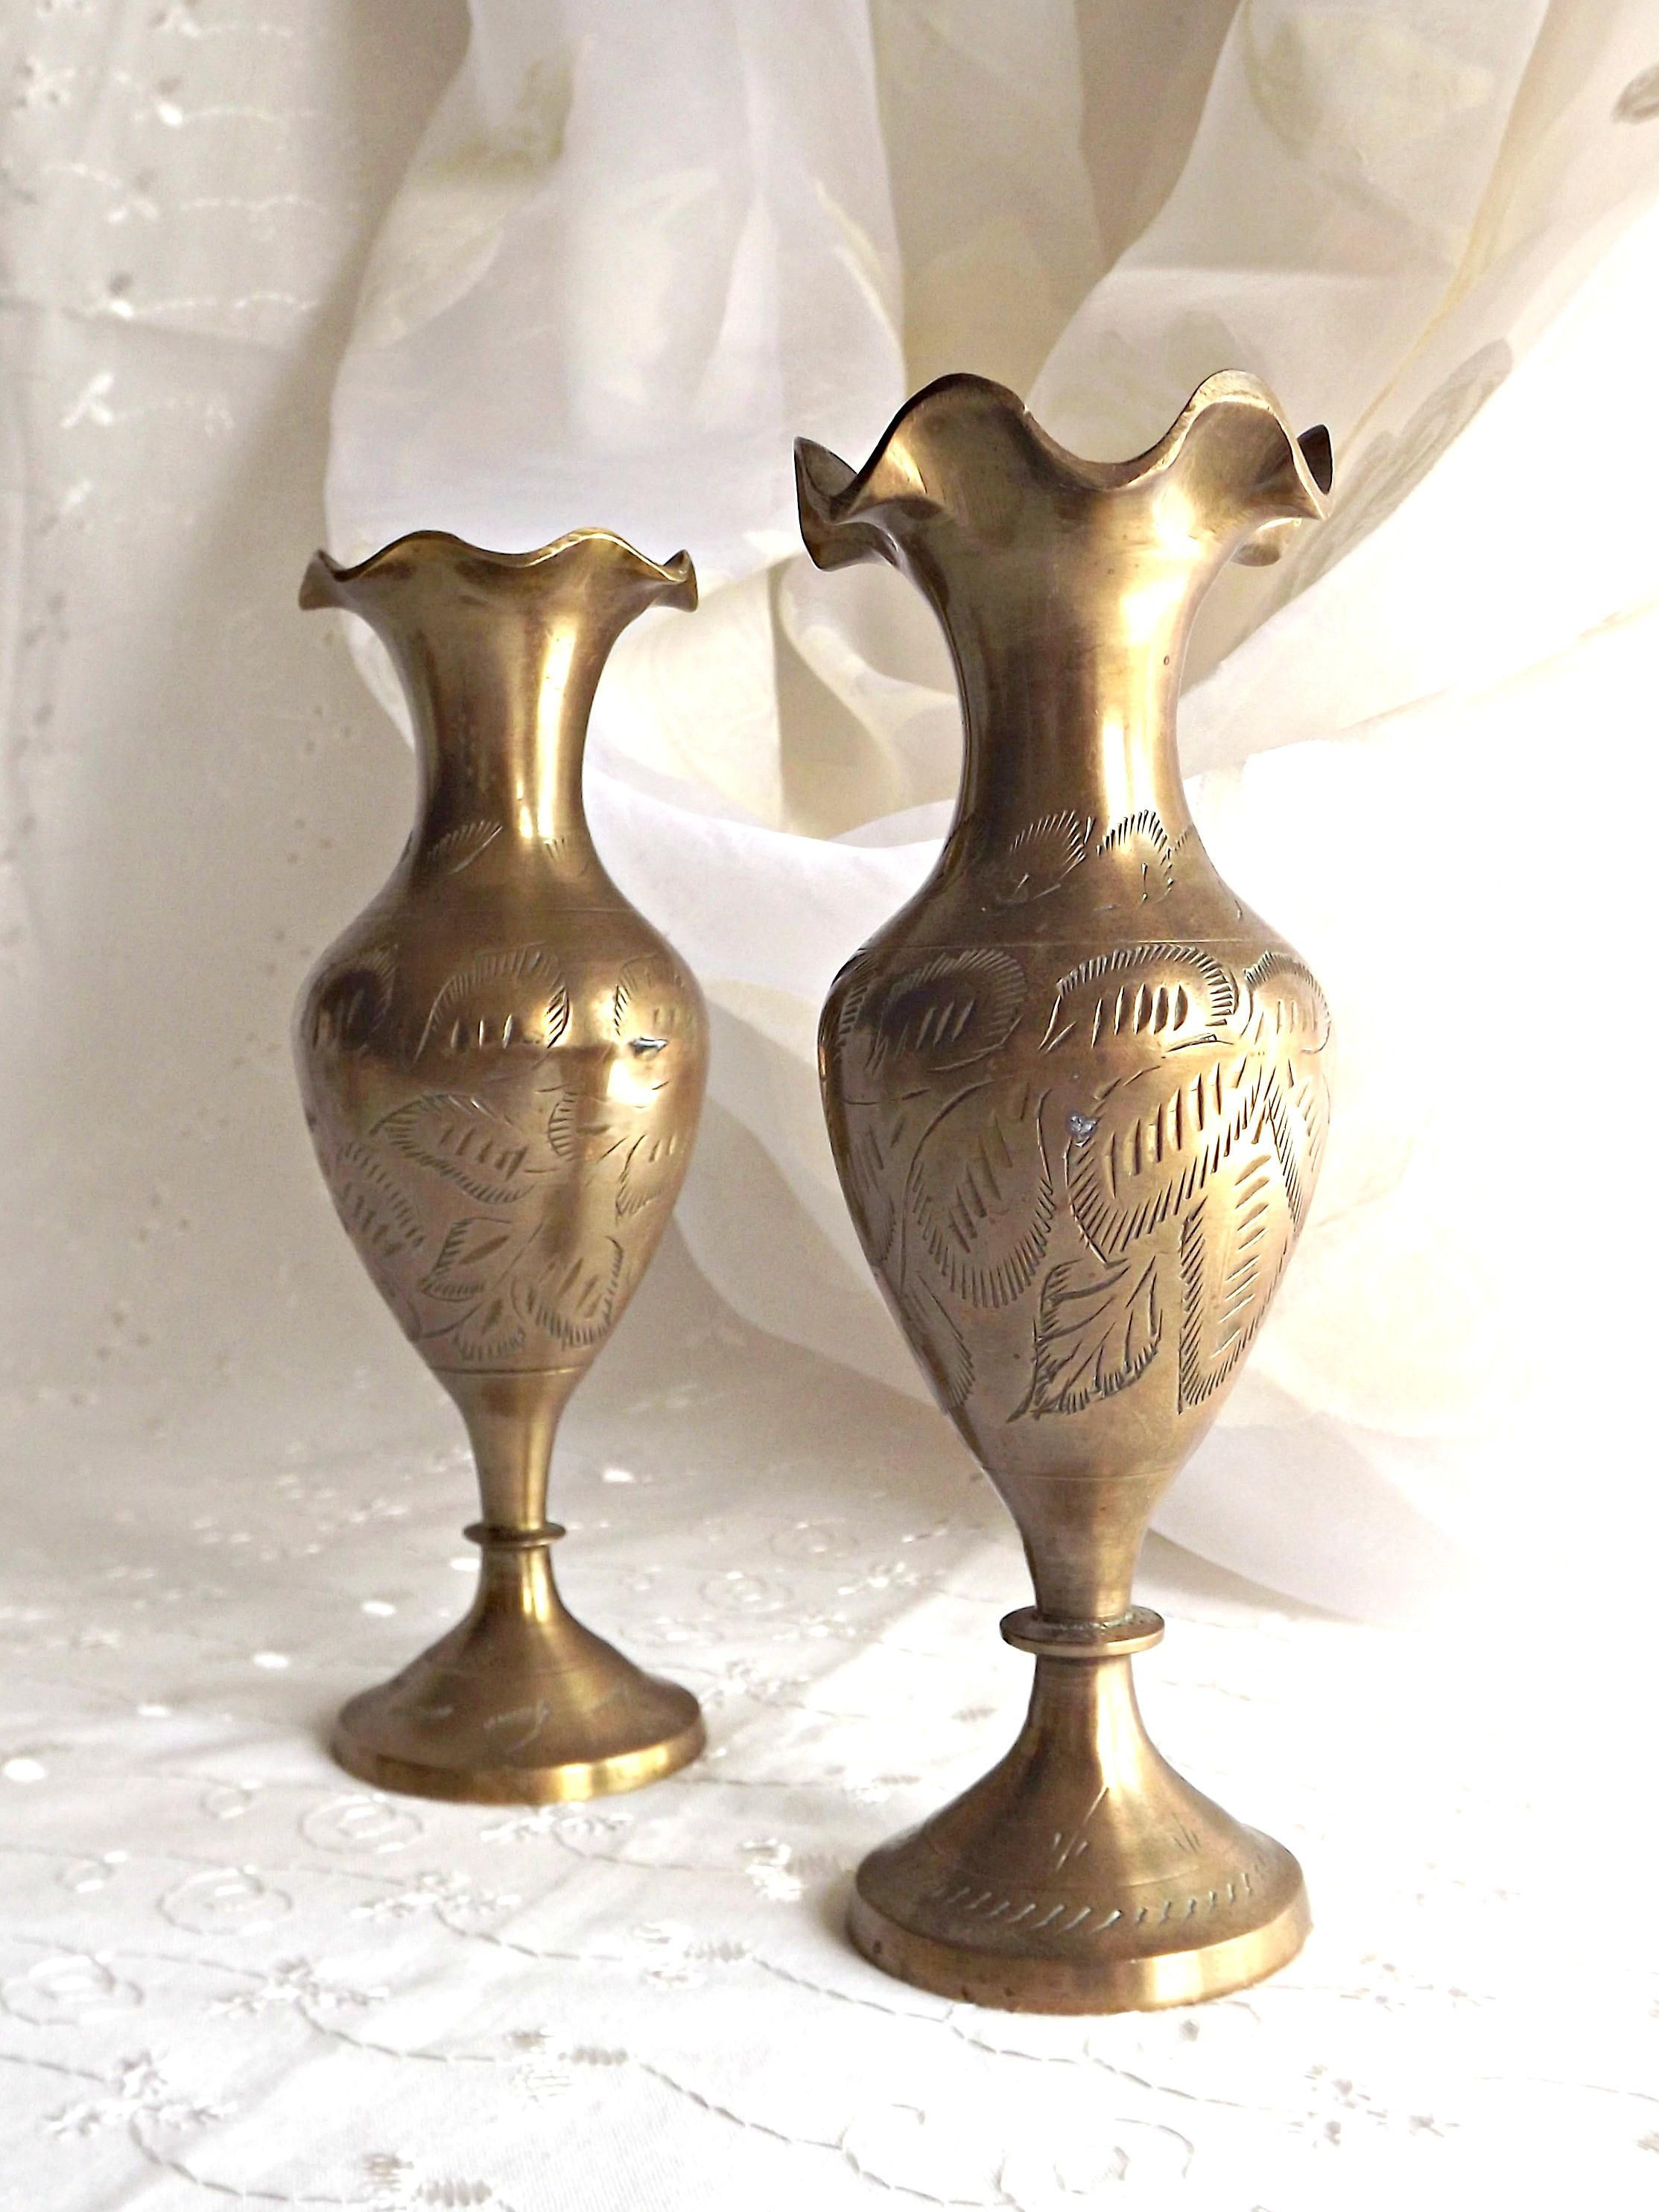 10 Recommended Vintage Brass Vase 2024 free download vintage brass vase of brass bud vase stock sarna brass vase from india 5 vintage brass for brass bud vase stock brass vase etched brass vase retro chic brass bohemian of brass bud